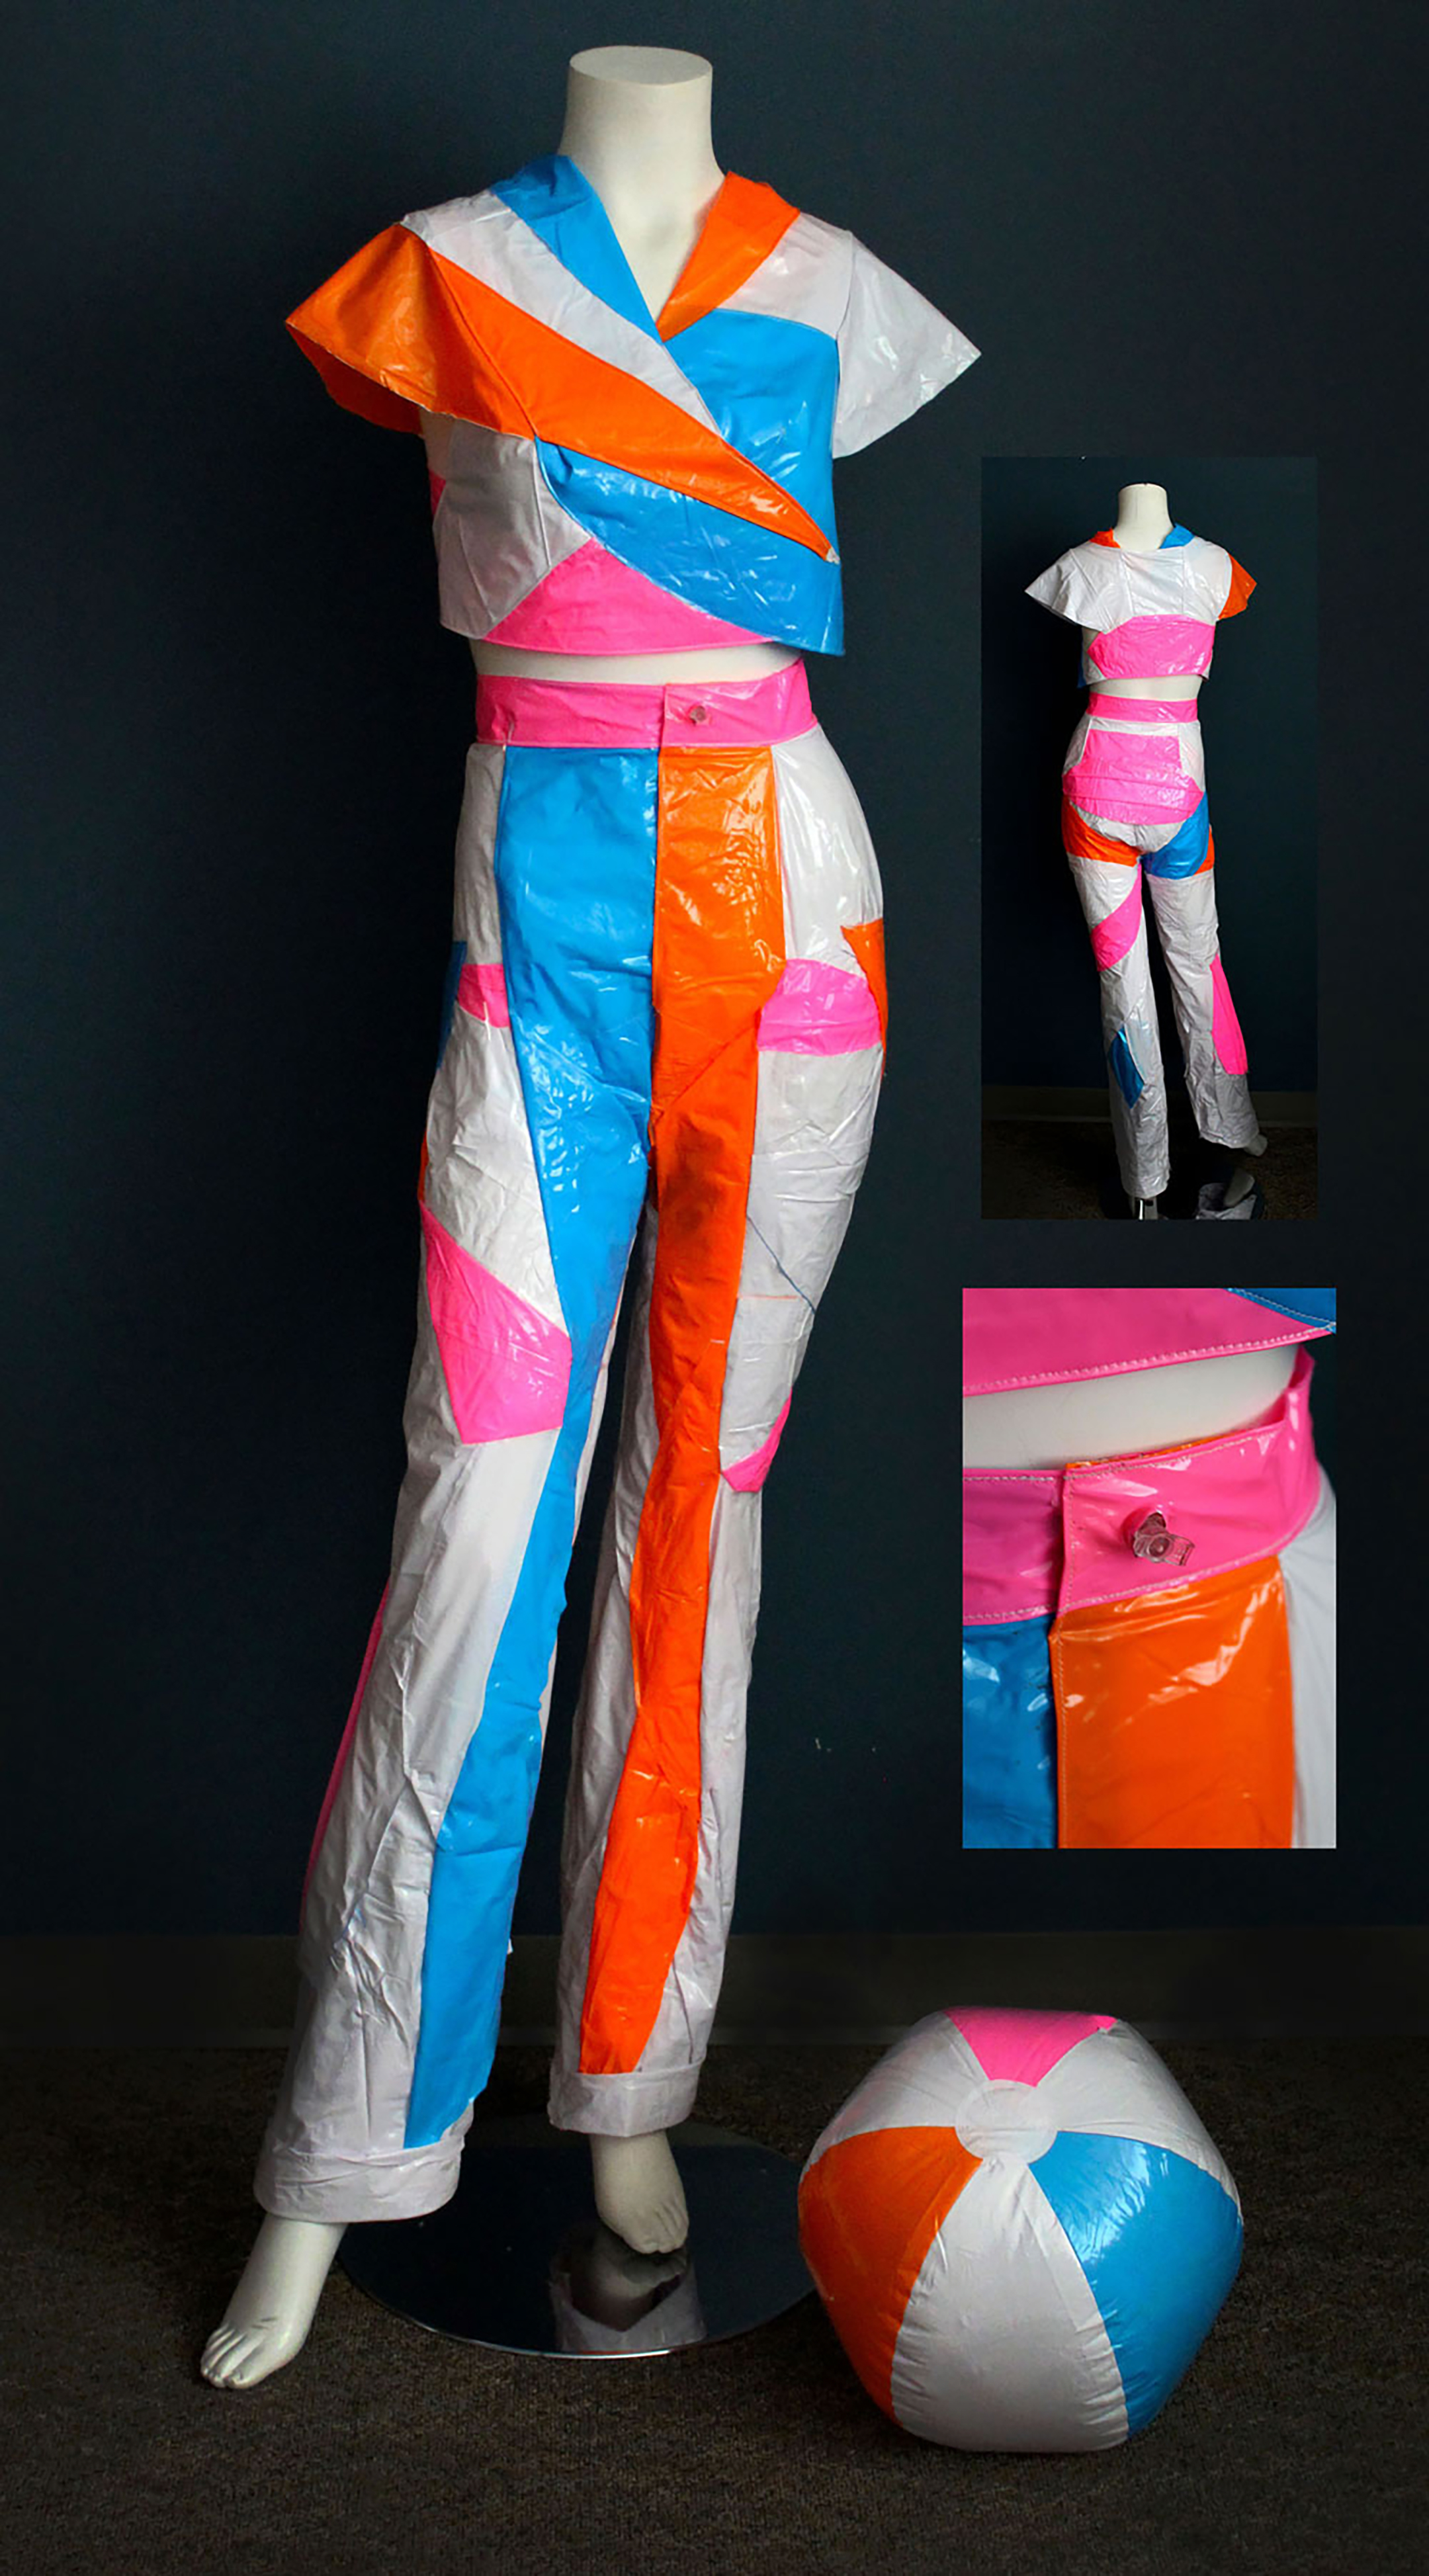 A pantsuit made out of color strips of beach balls